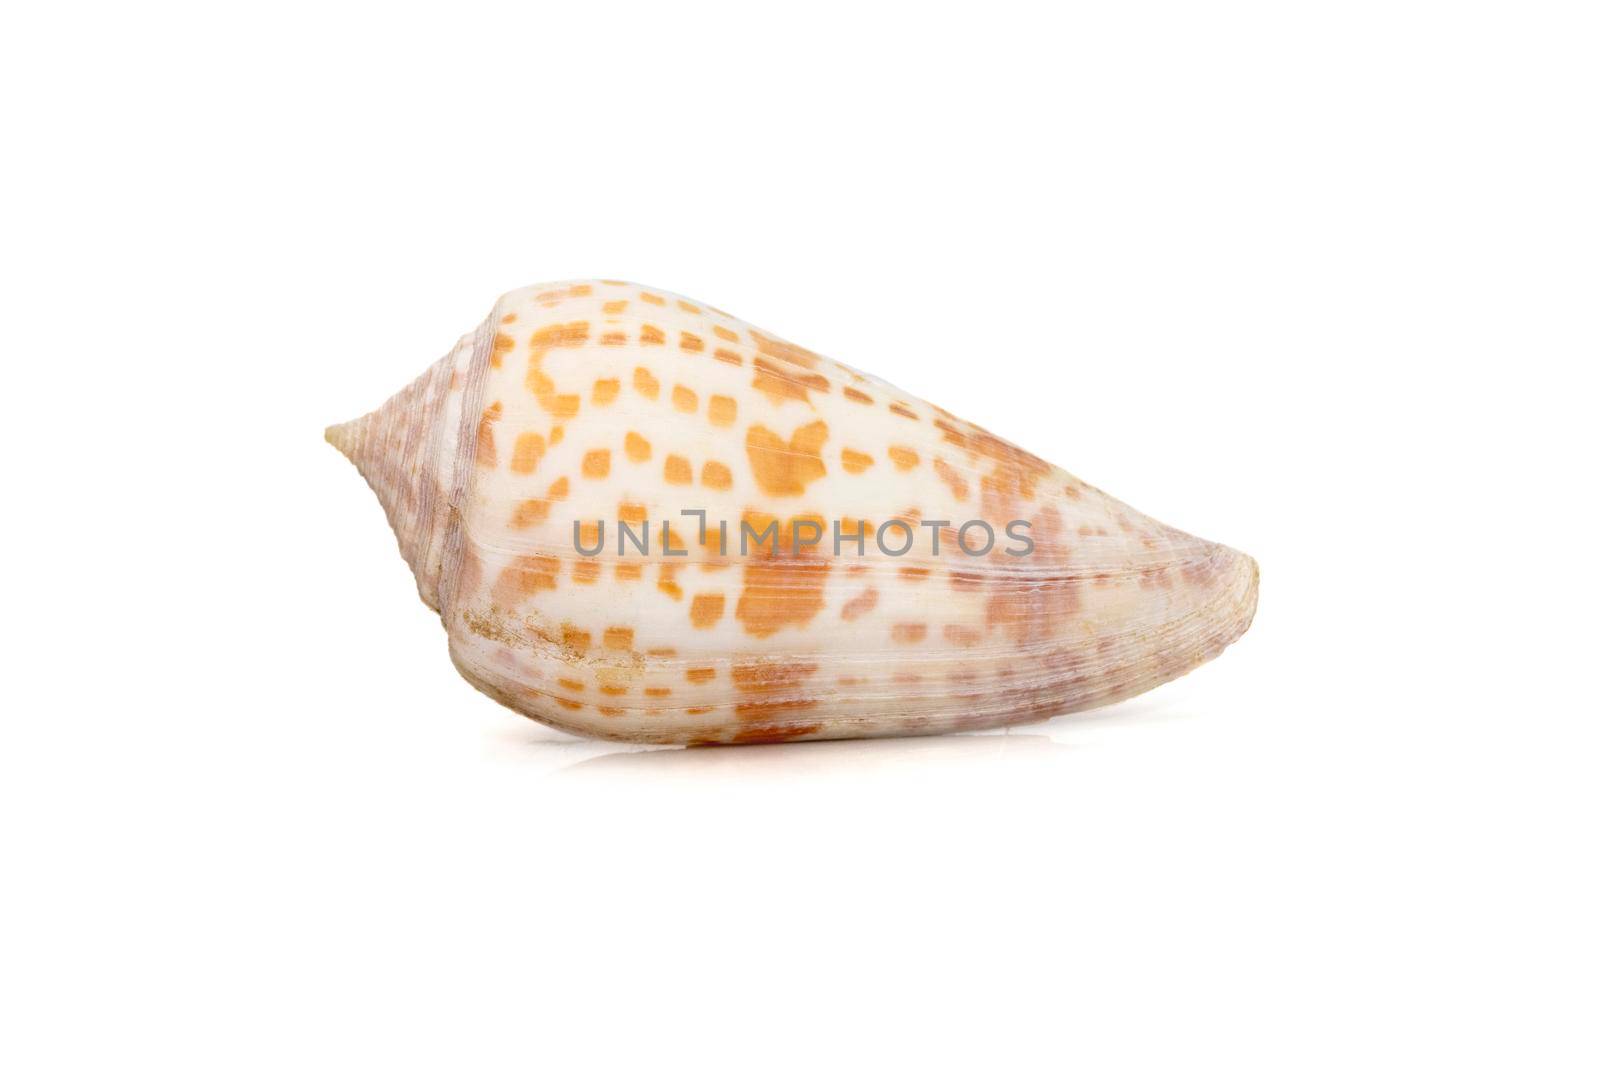 Image of conus tessulatus, common name the tessellated cone, is a species of sea snail, a marine gastropod mollusk in the family Conidae. Undersea Animals. Sea Shells.